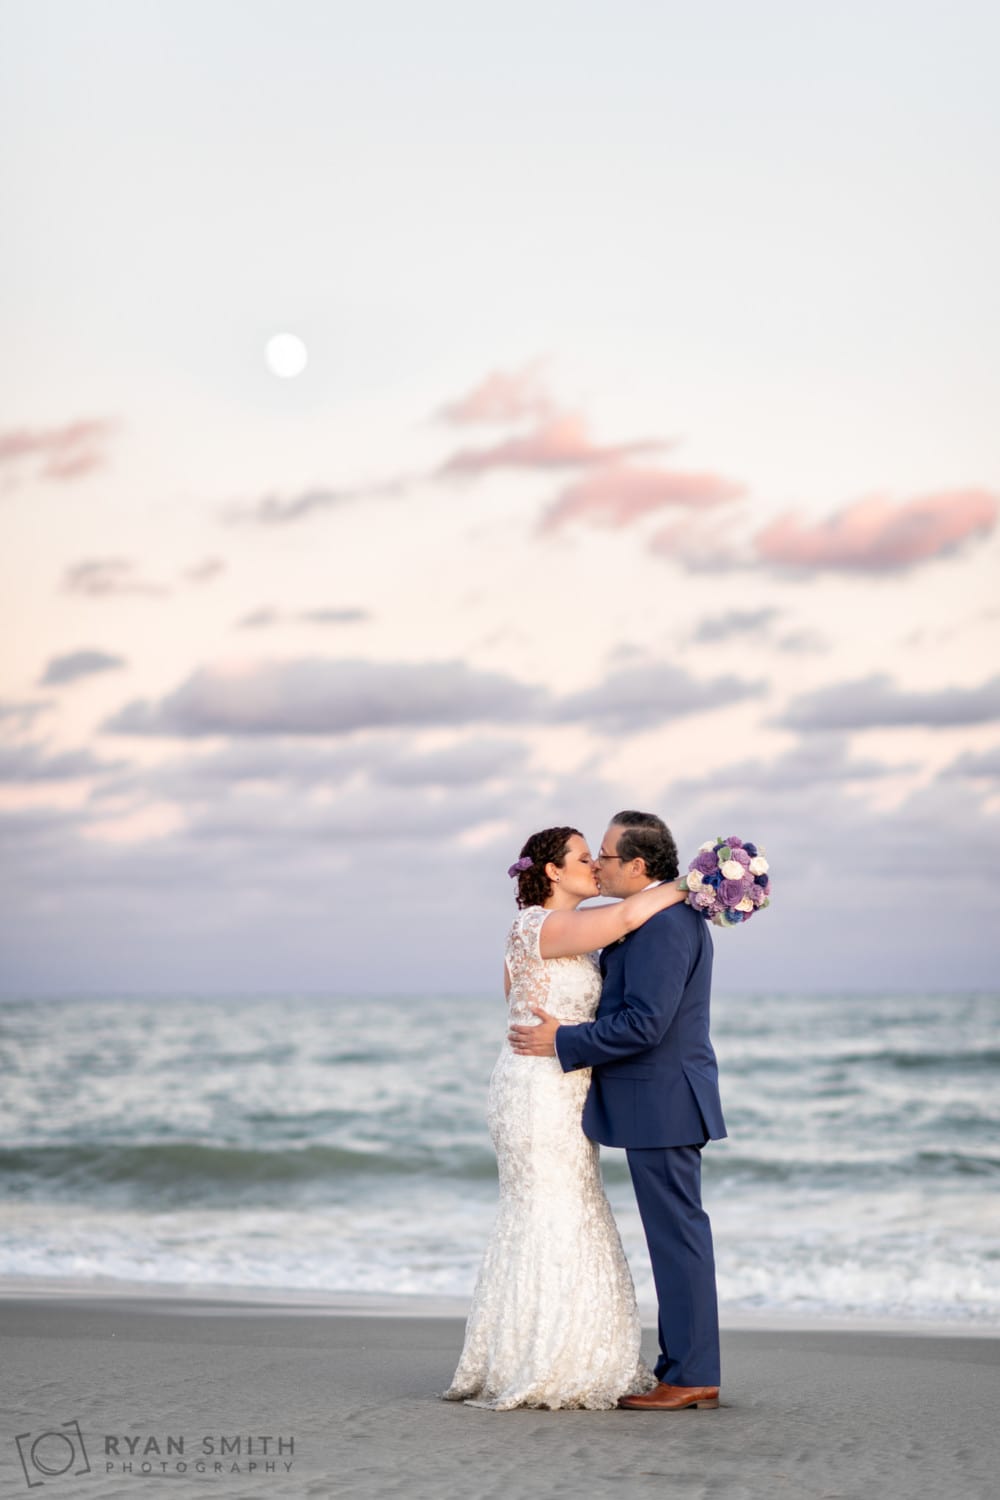 Kiss under the full moon - I photoshopped the moon a little lower in the sky - North Beach Plantation